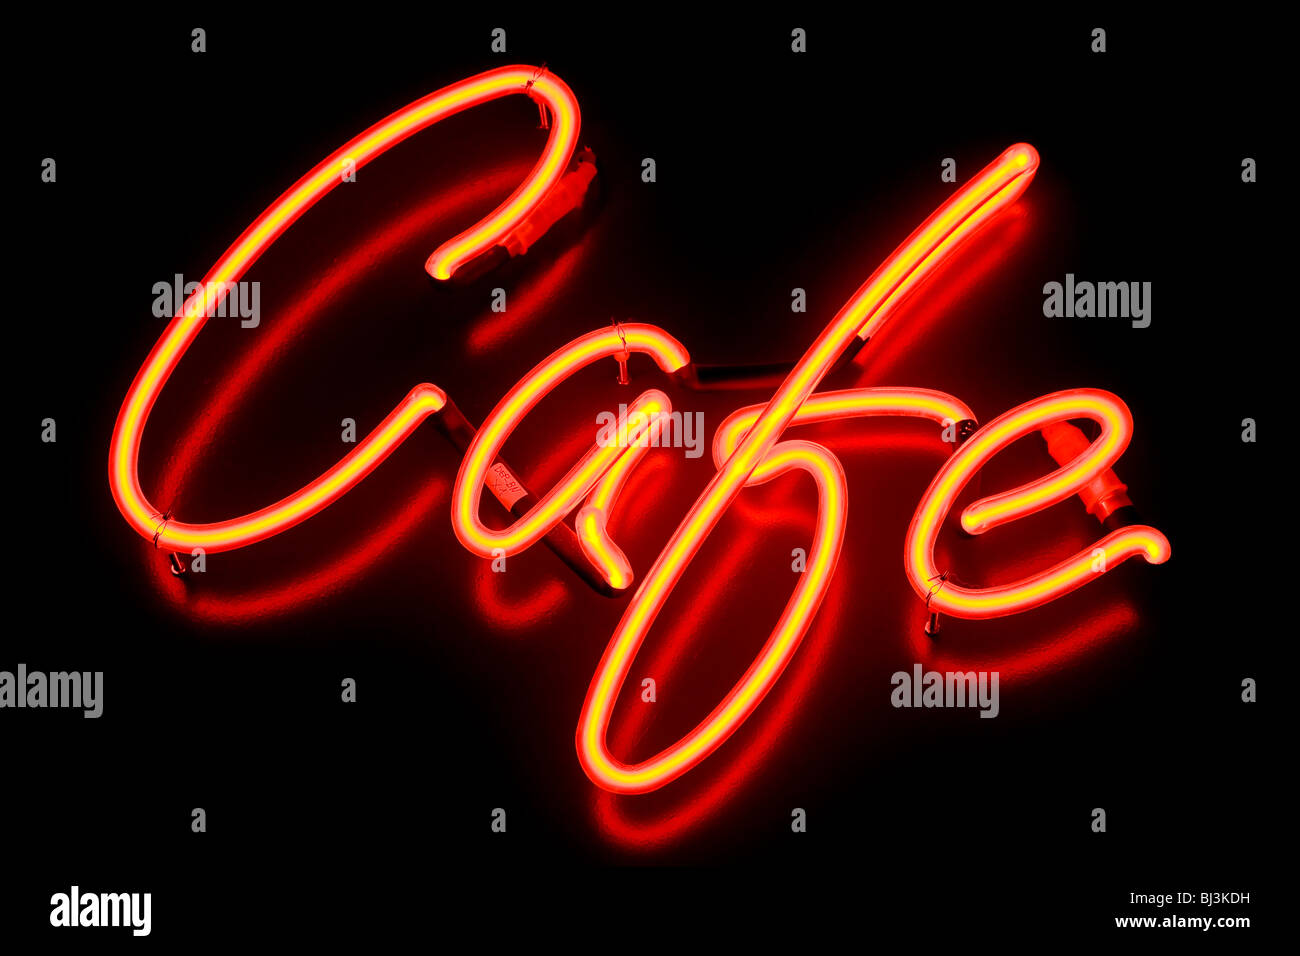 'Cafe', red neon sign Stock Photo